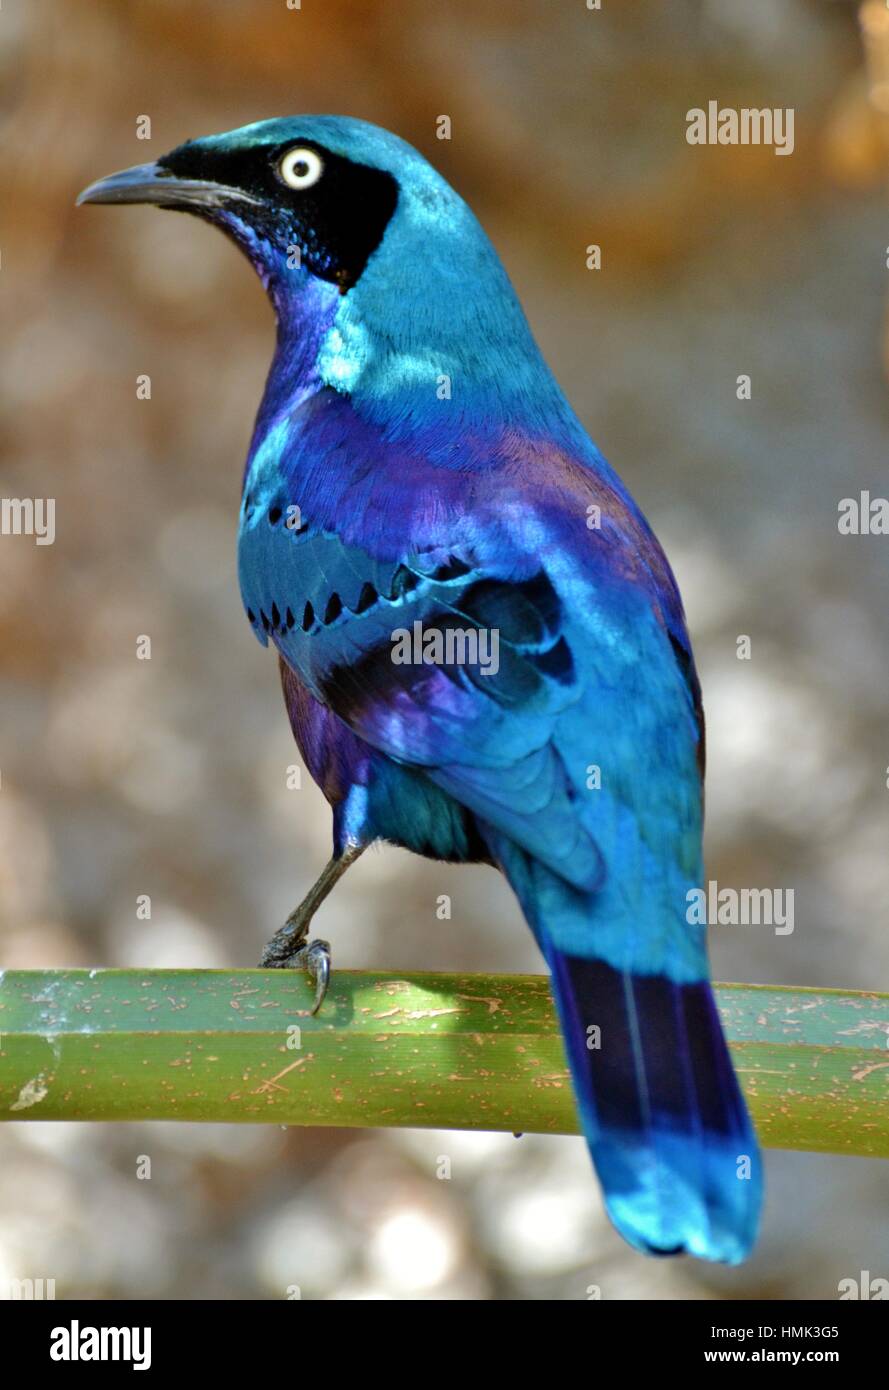 The Superb Starling (Lamprotornis) is an iridescent blue bird which occurs in Africa. Stock Photo